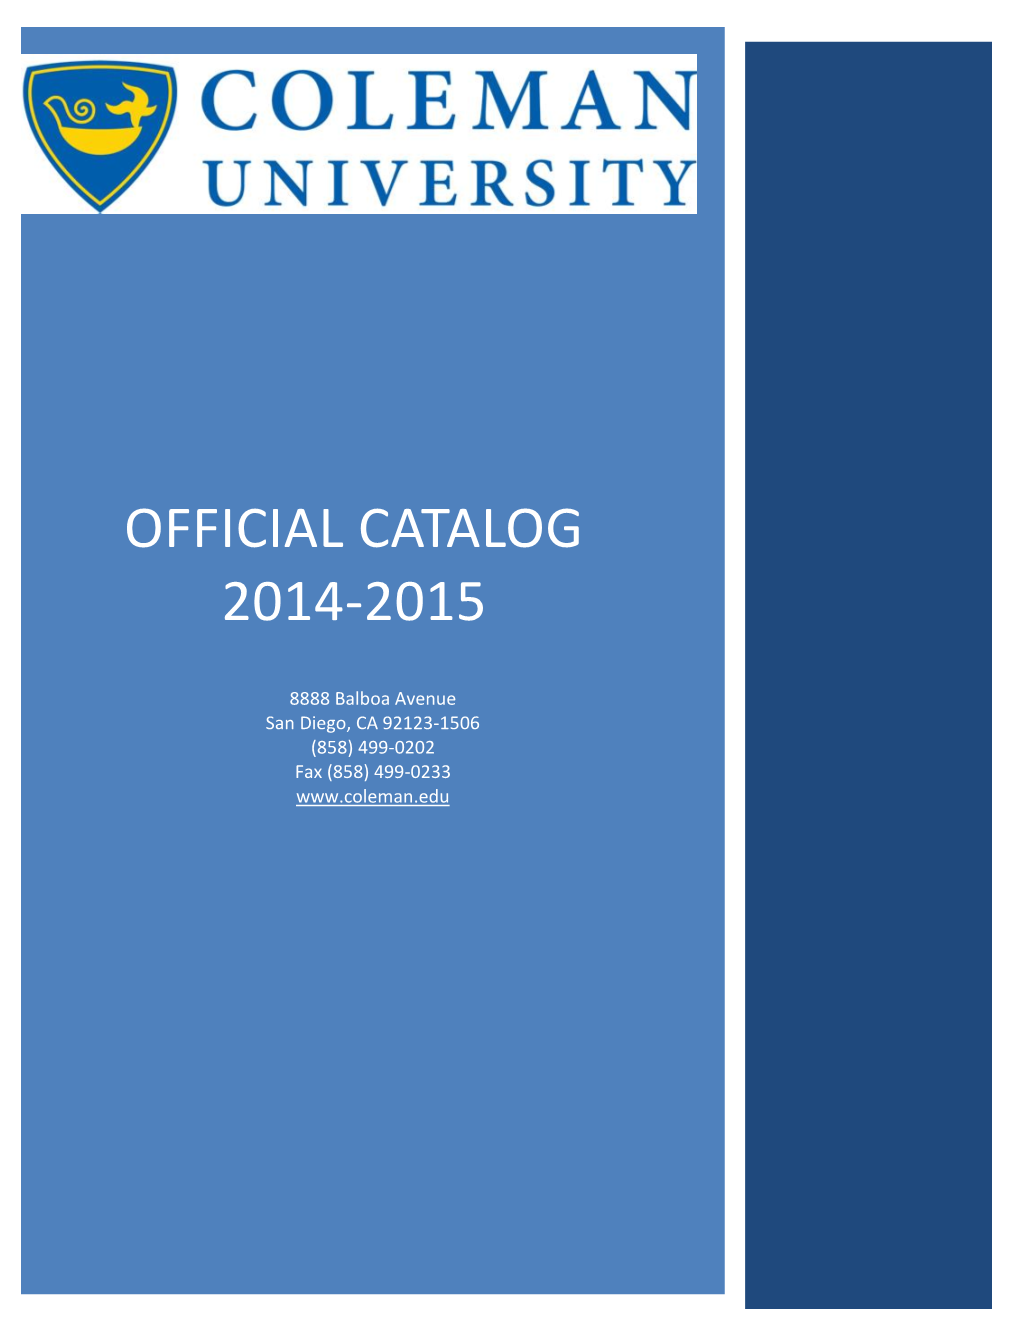 Coleman University Catalog a Nonprofit Coeducational Institution Originally Chartered in 1963